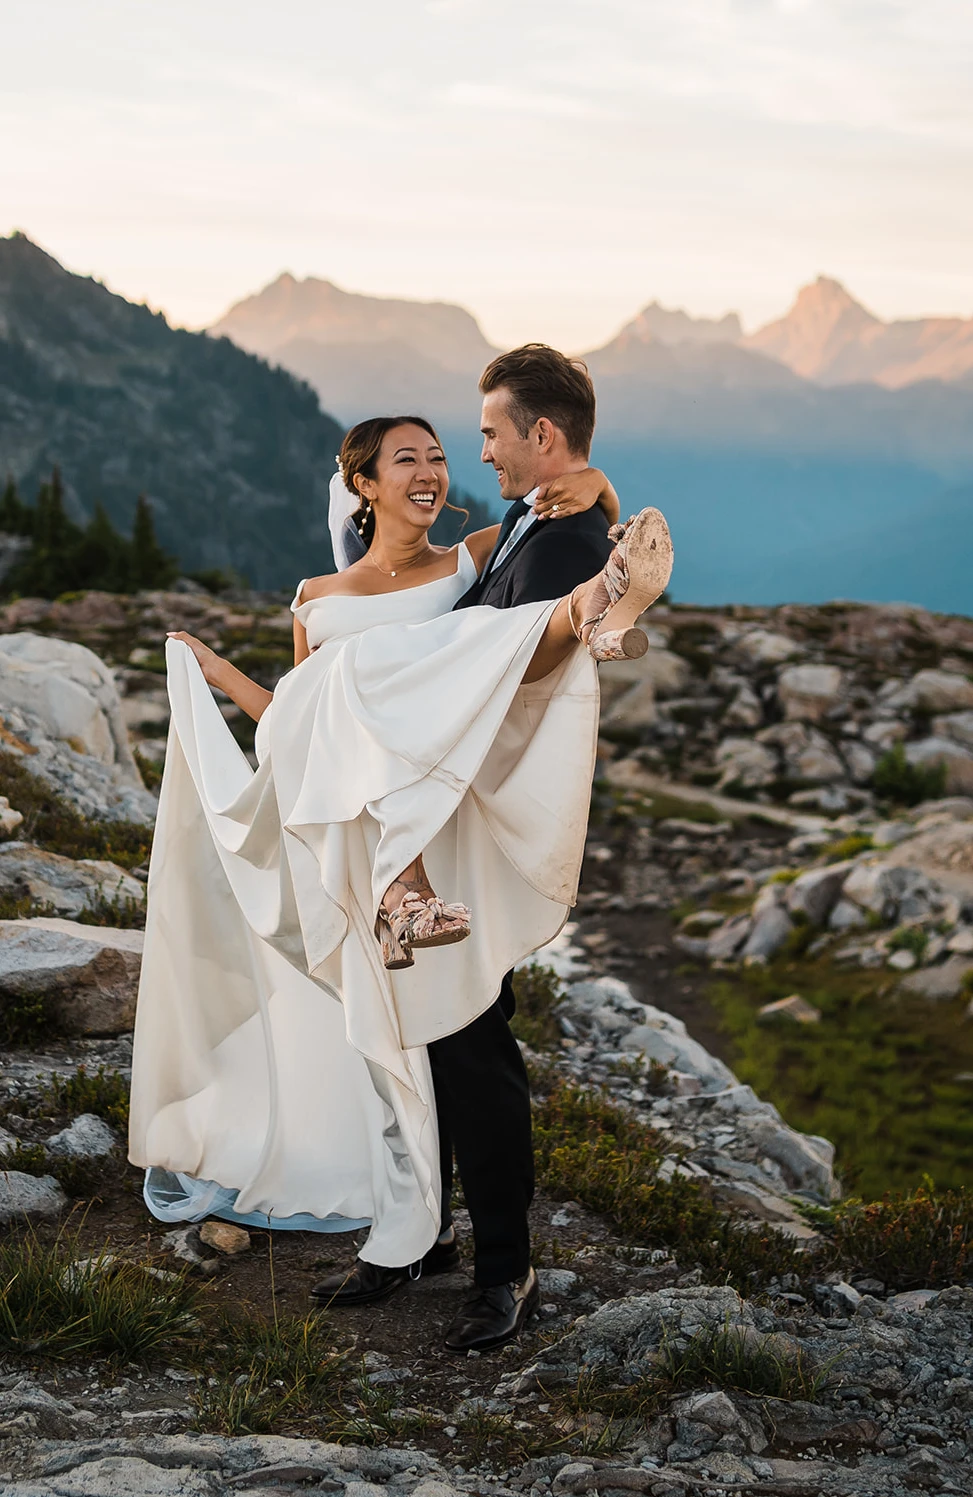 Groom carrying bride on mountainside